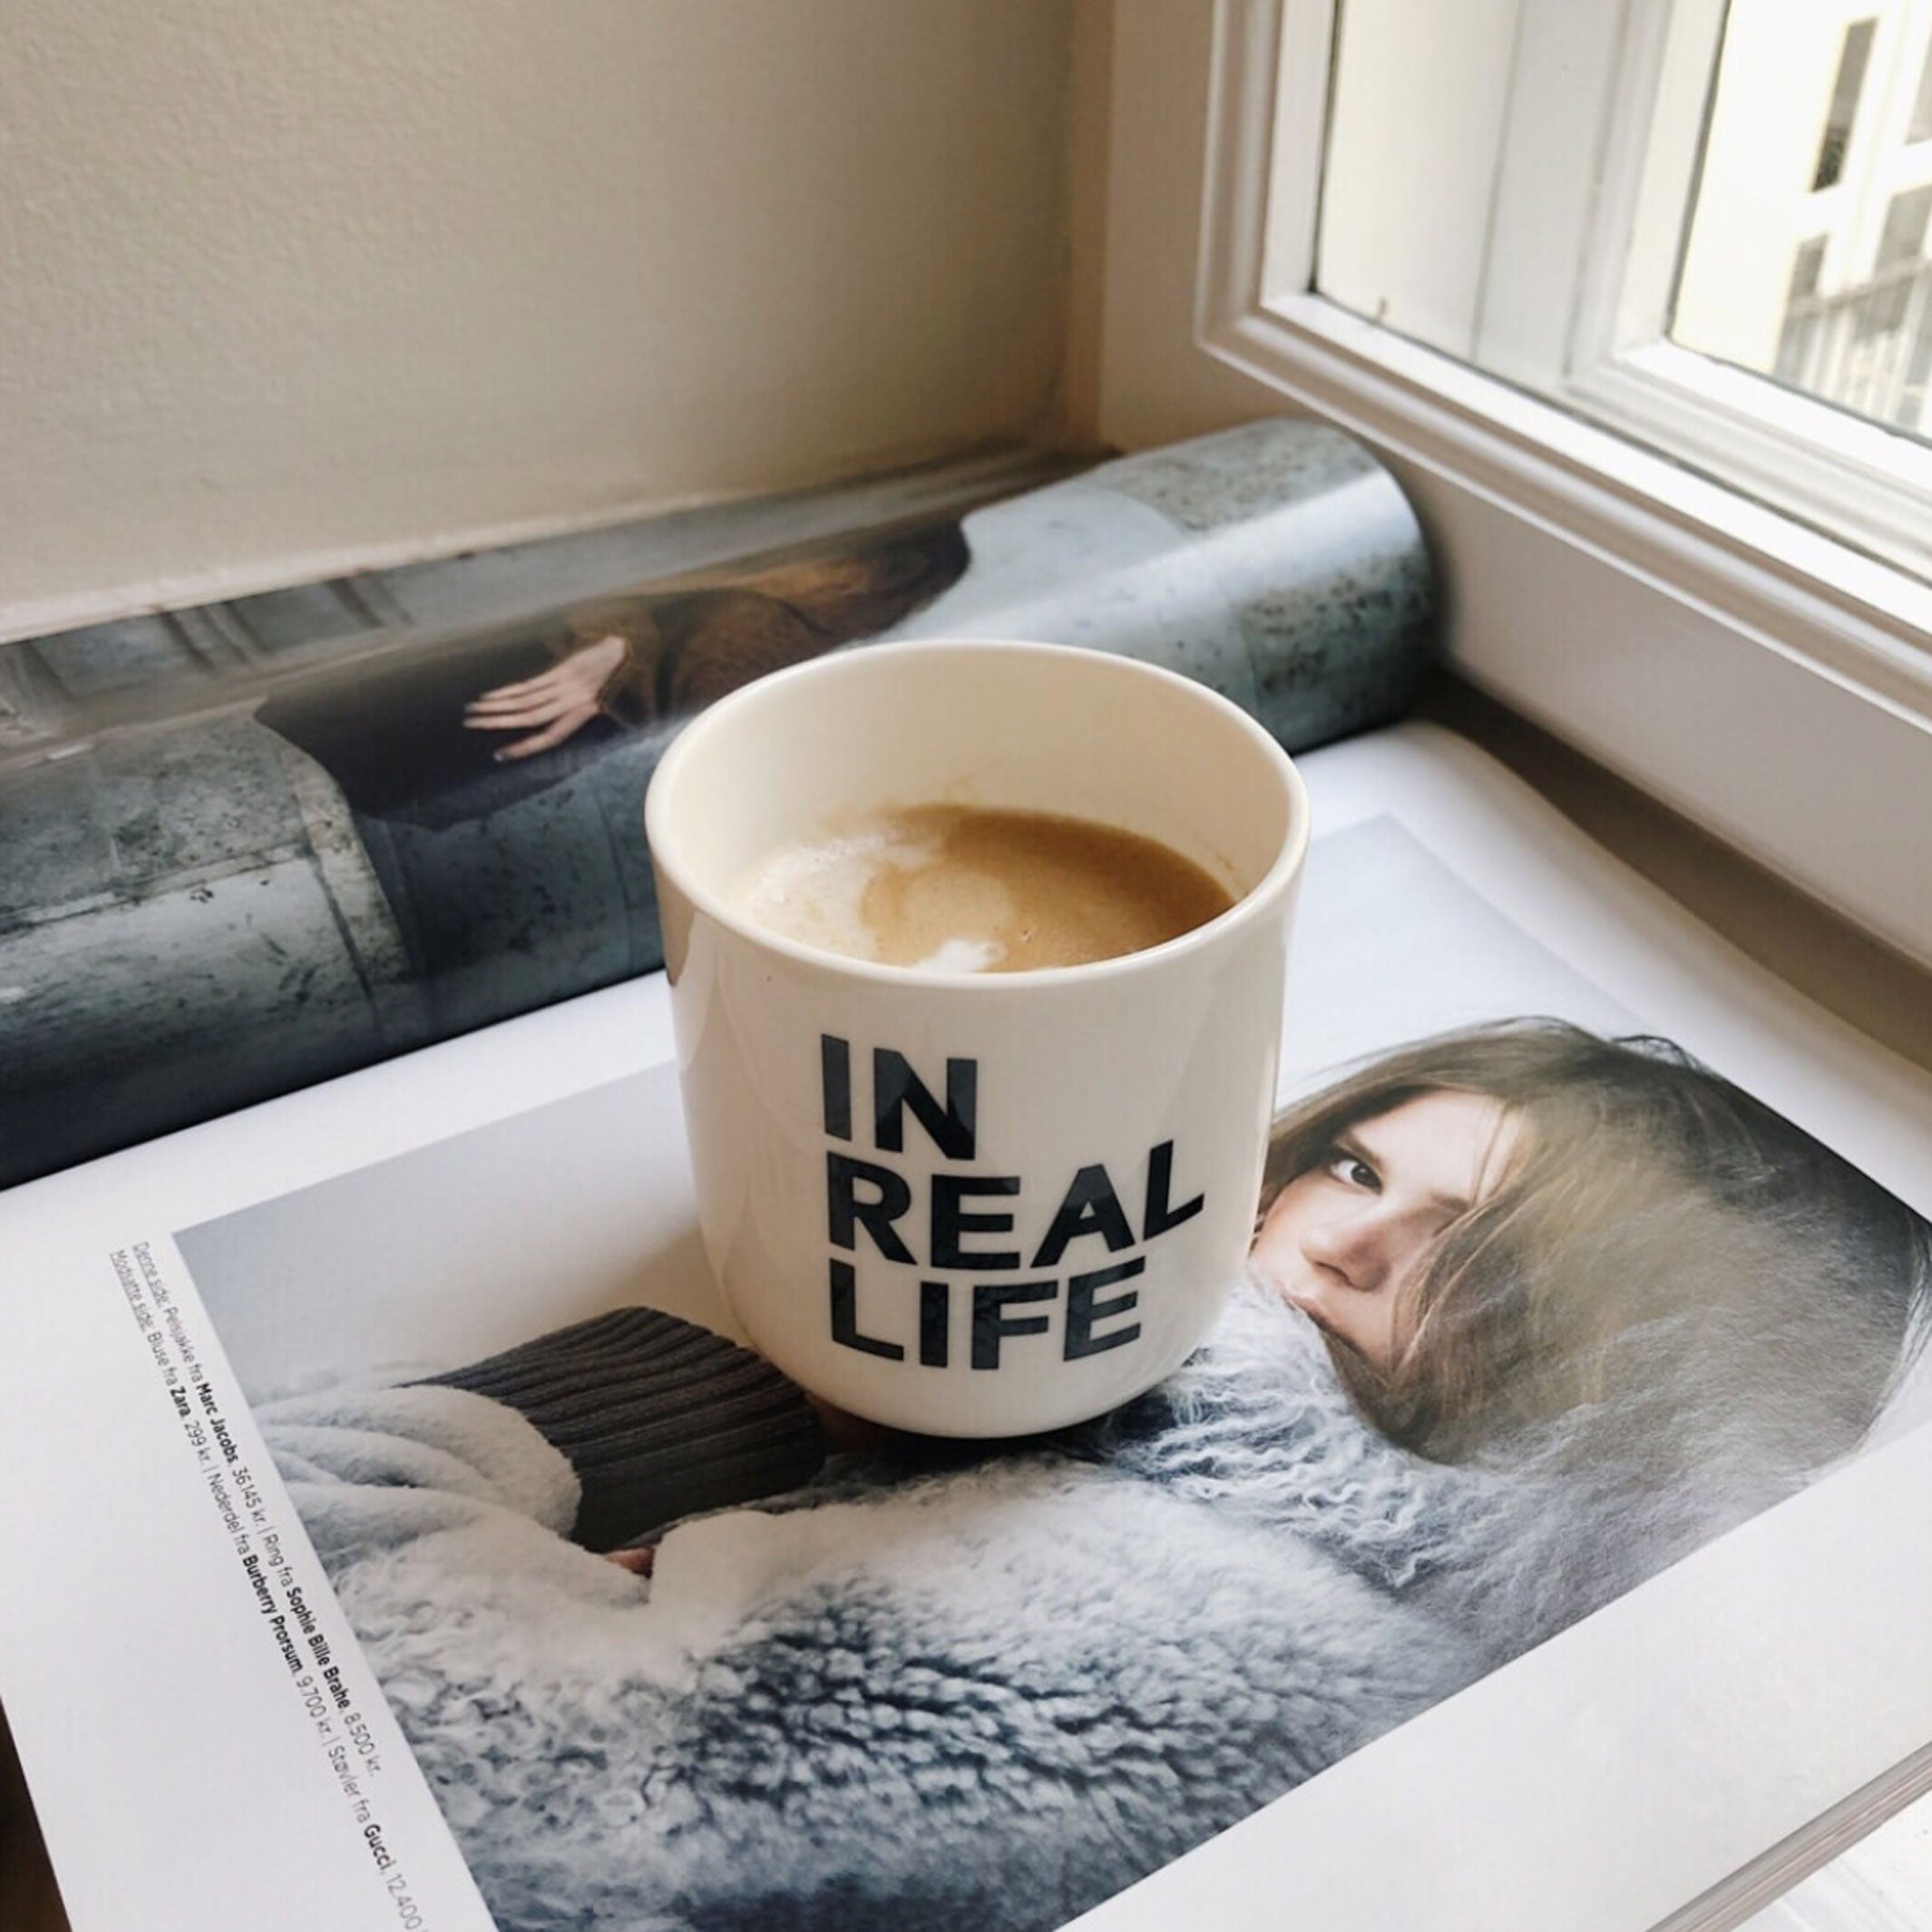 PLAY HARD  | white coffee & tea MUG with black typo | in real life series | PLTY